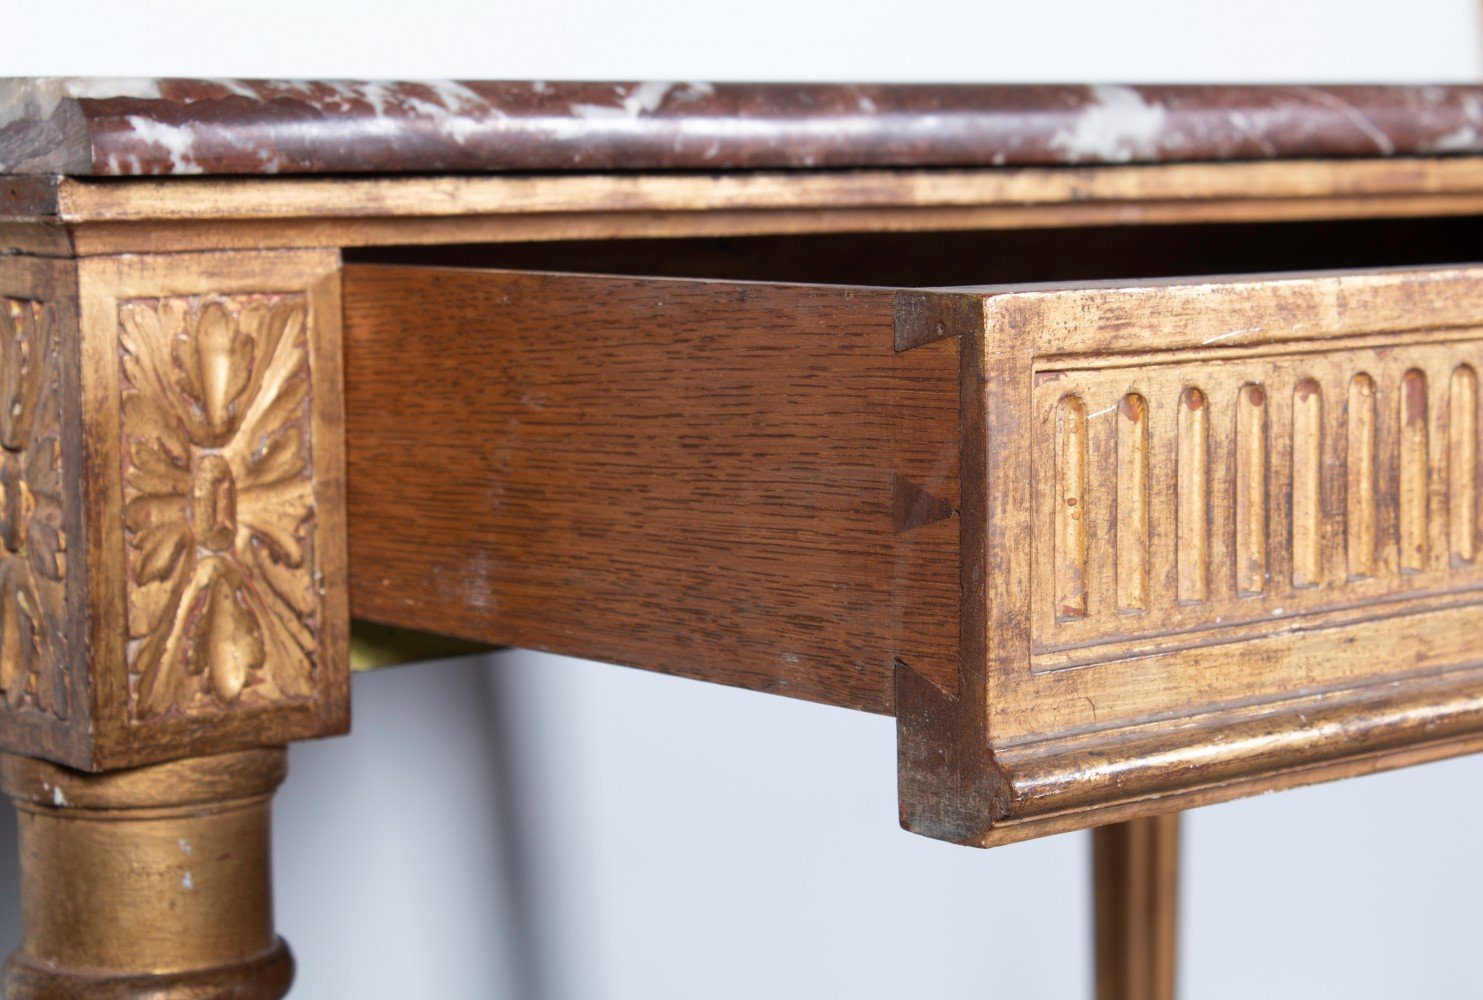 19th Century French Finely Carved Marble Top Louis XVI Style Bureau (Writing Desk)